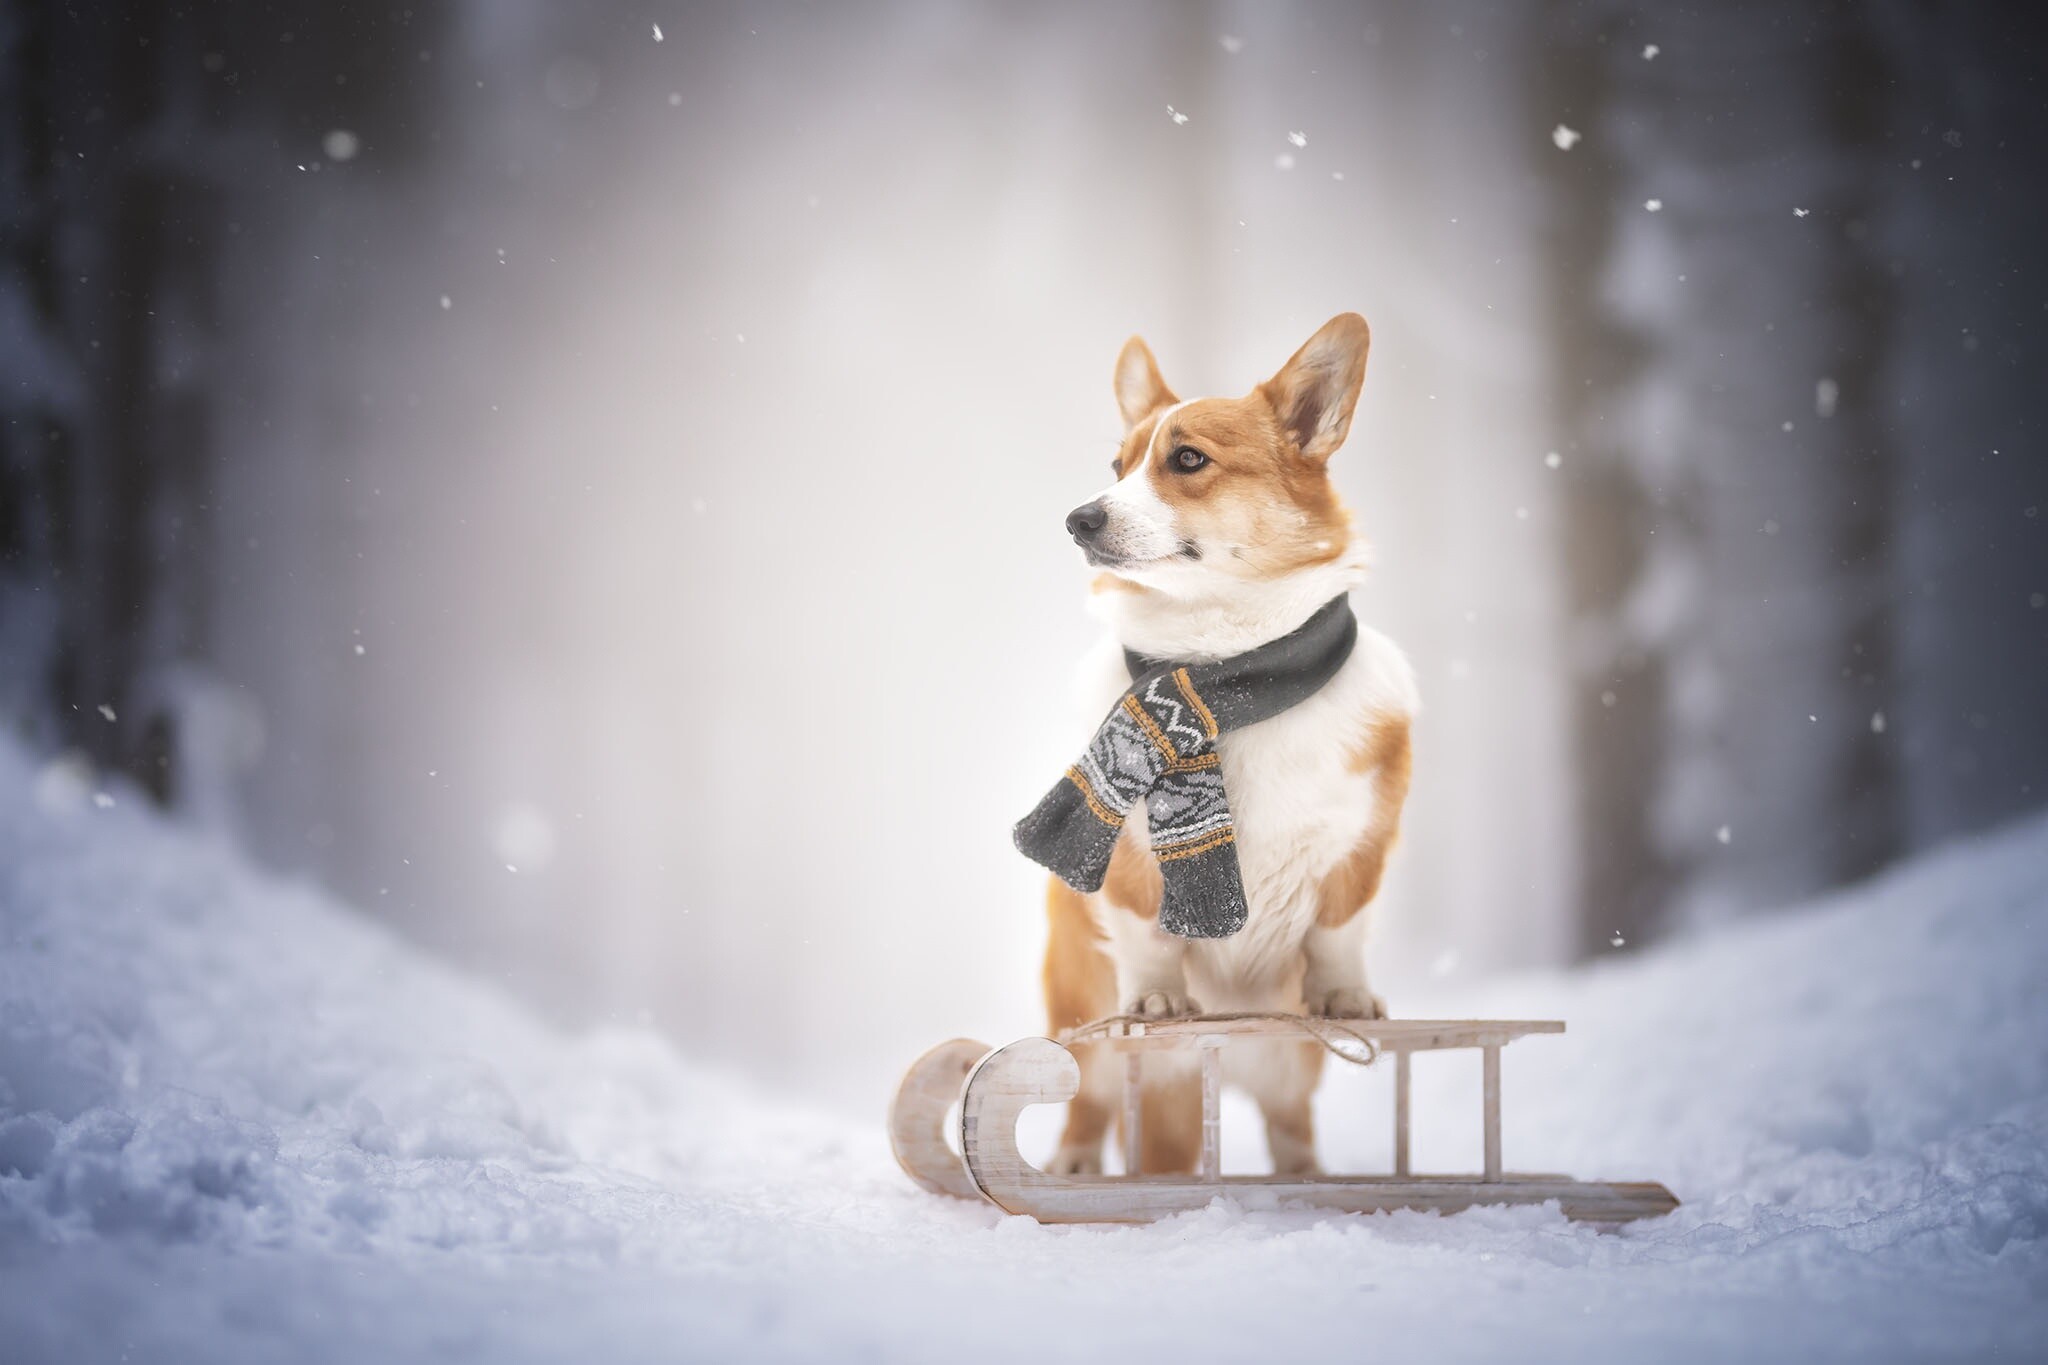 Corgi: The breed was once used to guard children, Welsh dog. 2050x1370 HD Wallpaper.